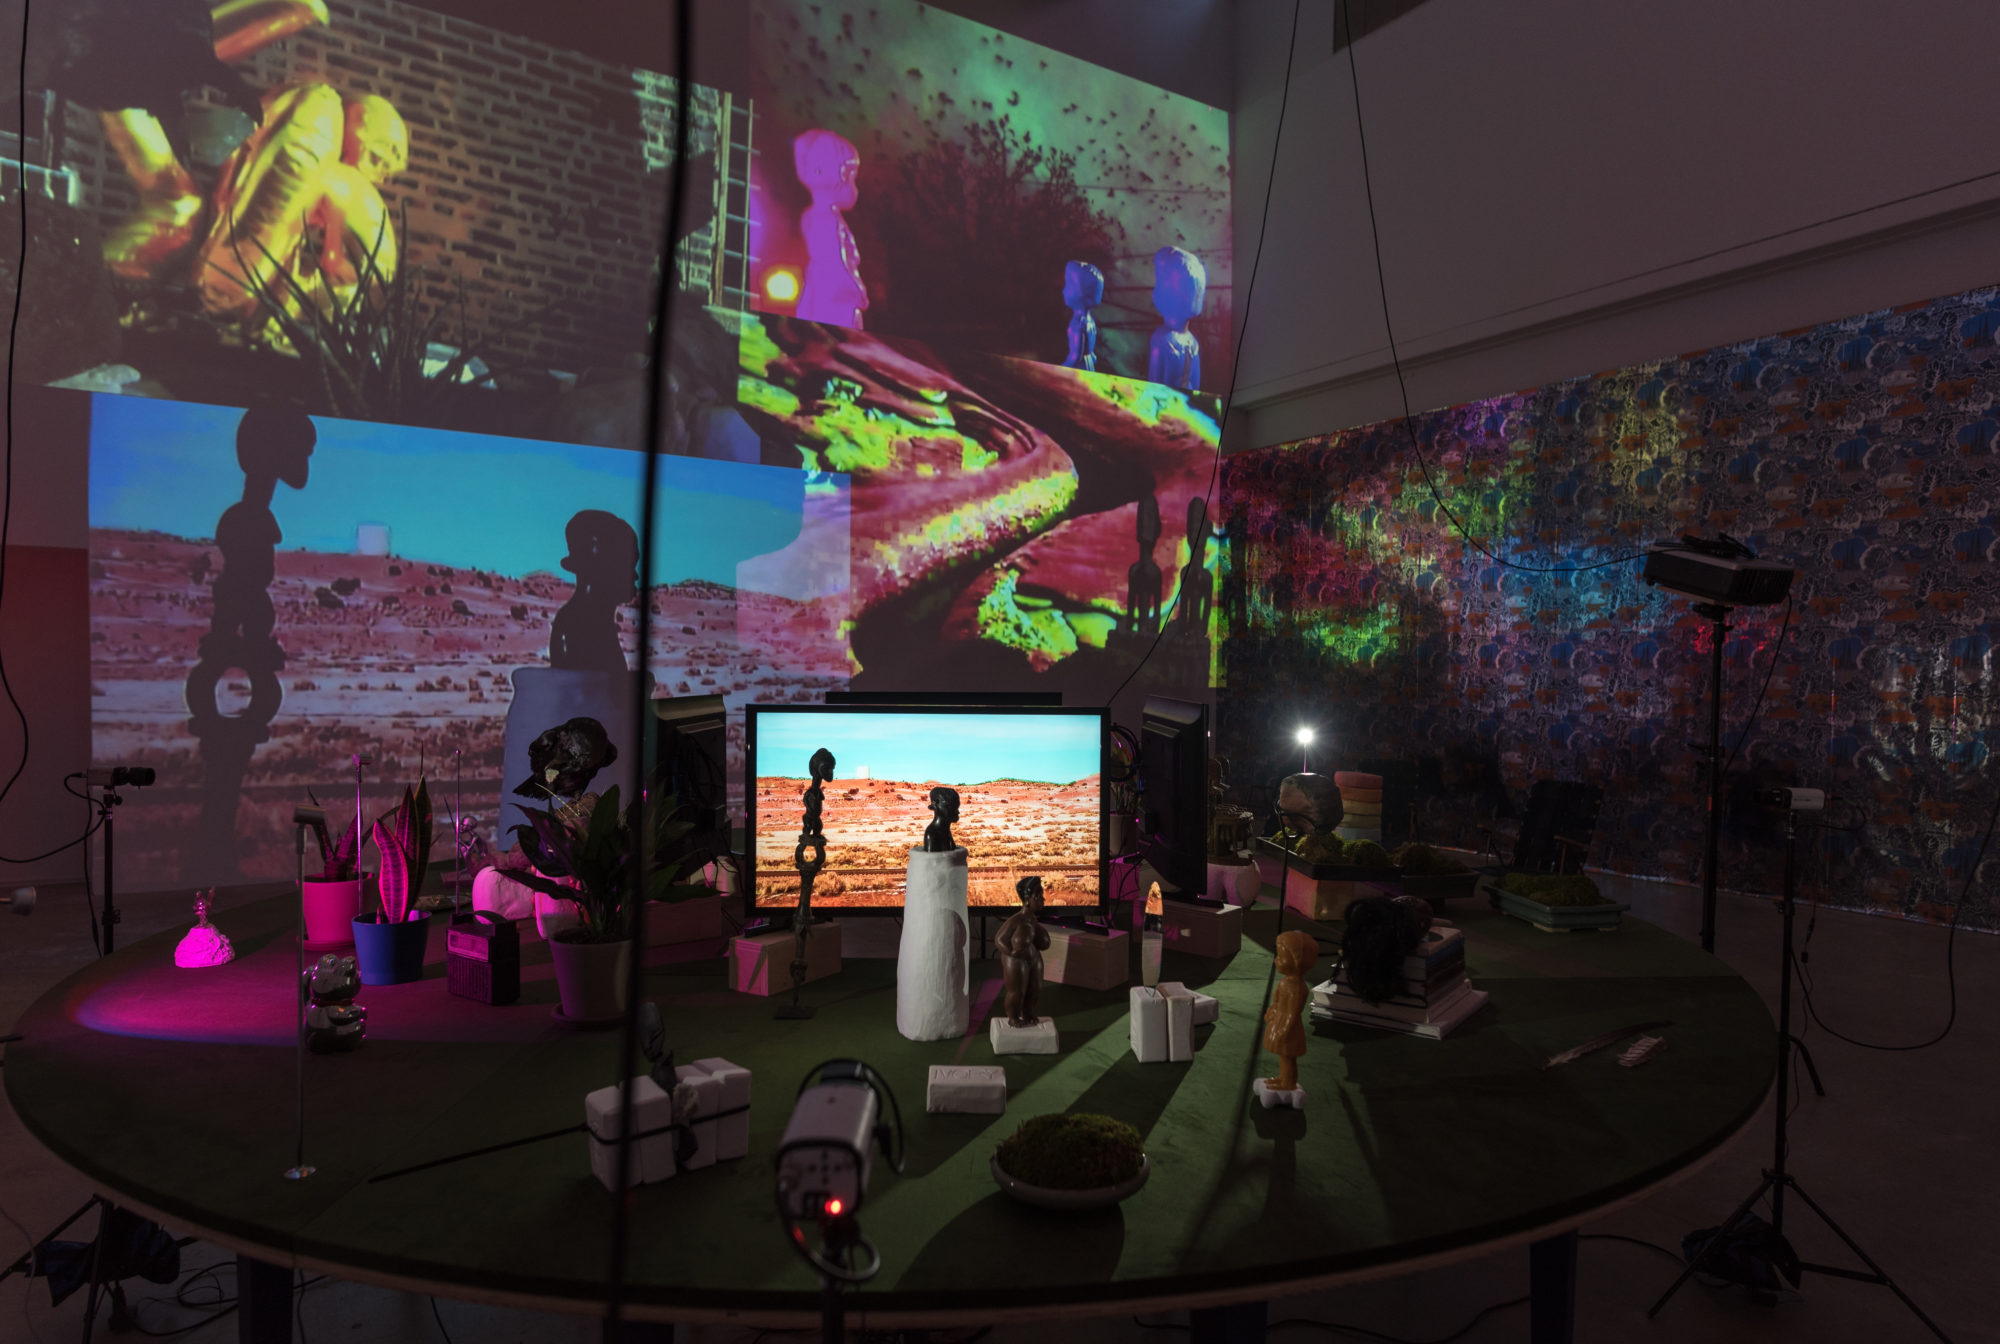 various objects are located on a round table in the center of a dark room. video projections of the items on the table are displayed wall